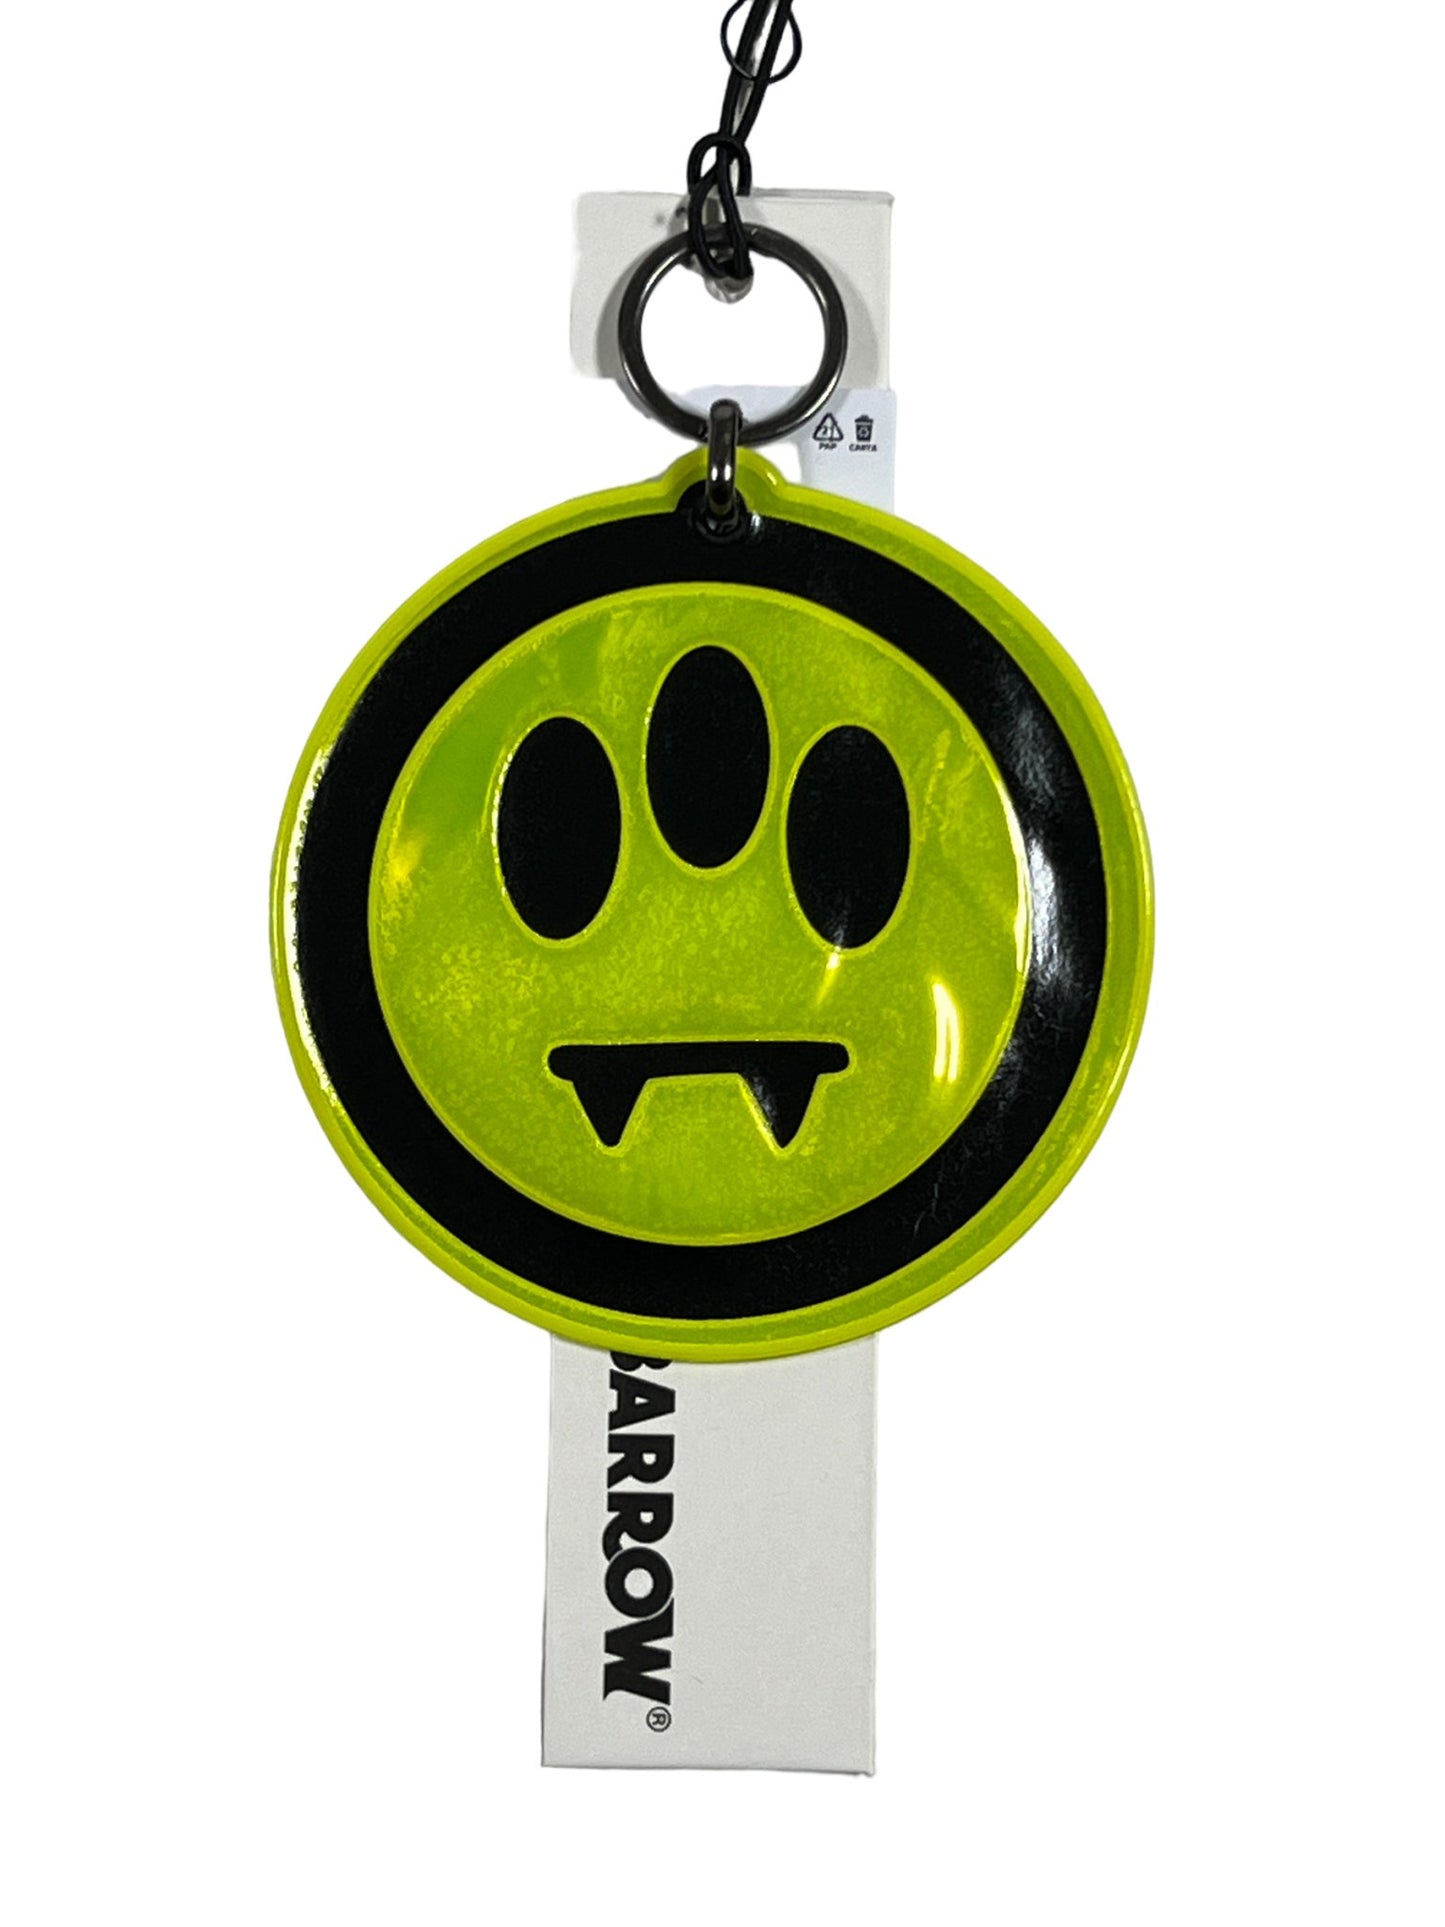 Keychain with a green and black design featuring a stylized paw print and a dripping effect, attached to a branded BARROW S4BWUATH036 JERSEY T-SHIRT UNISEX tag.